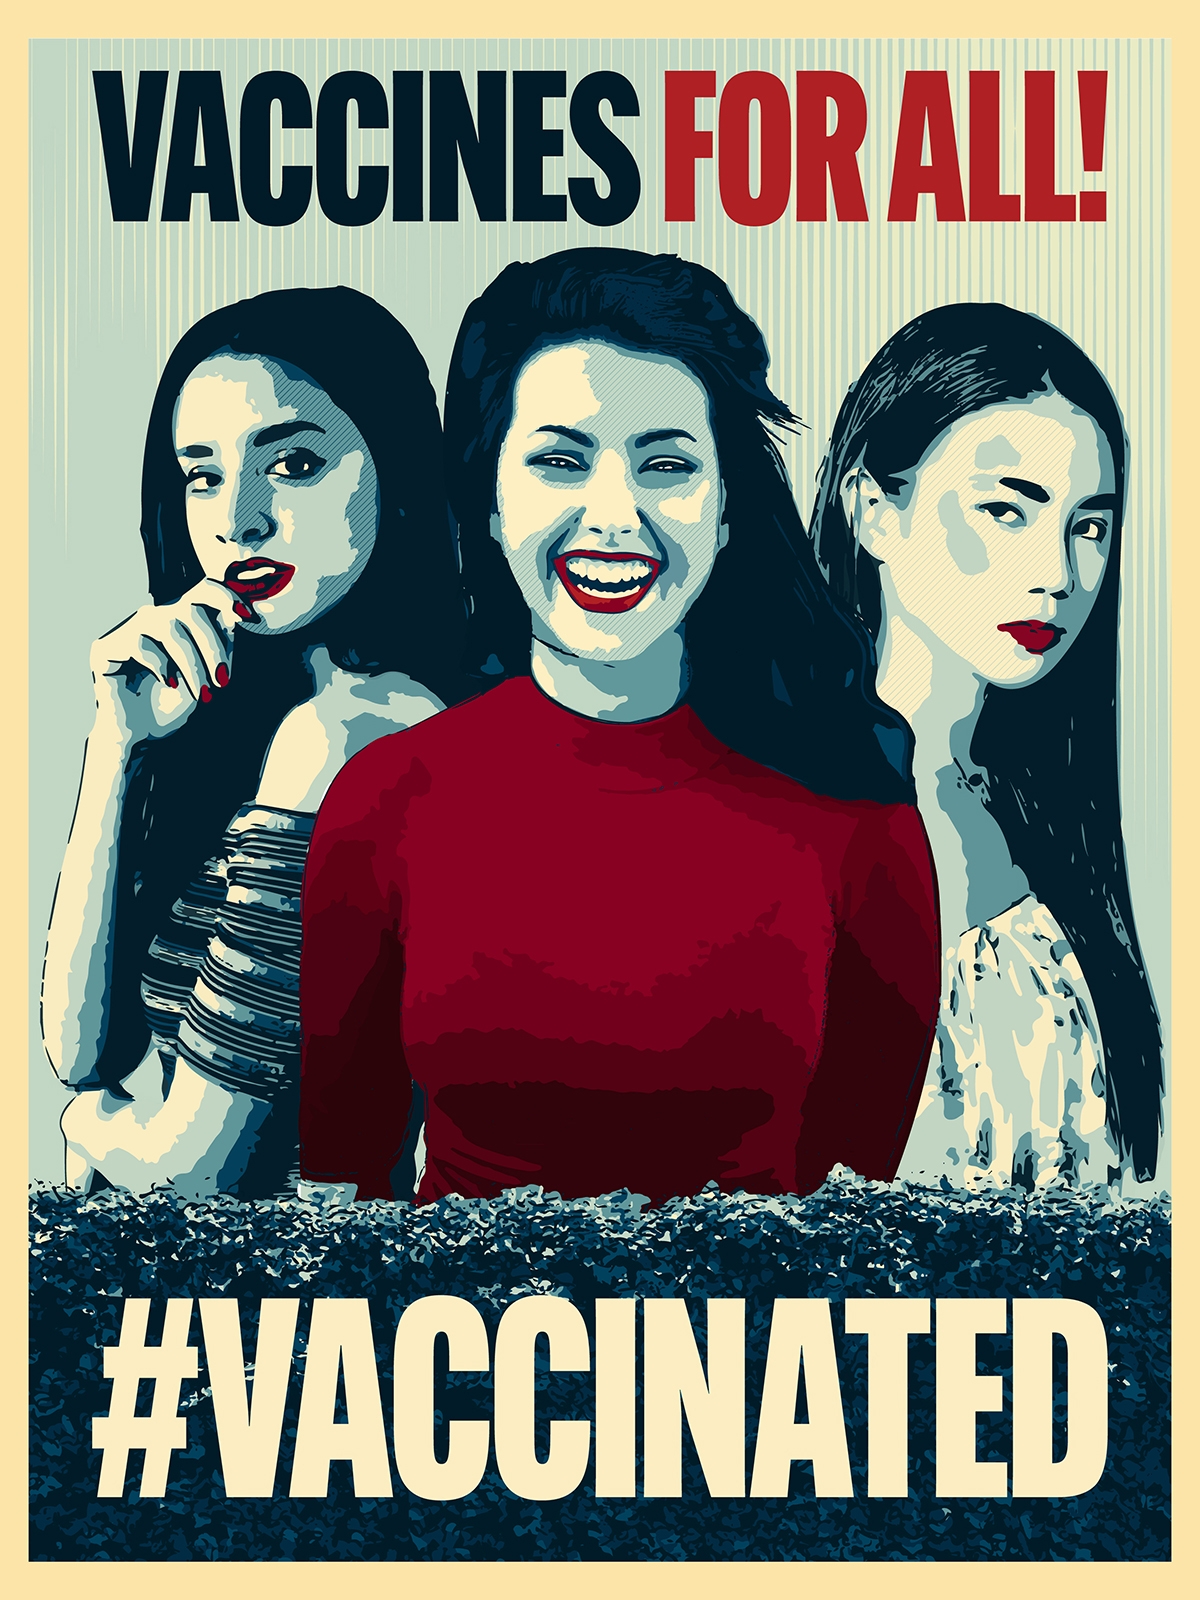 Vaccines for Victory Campaign